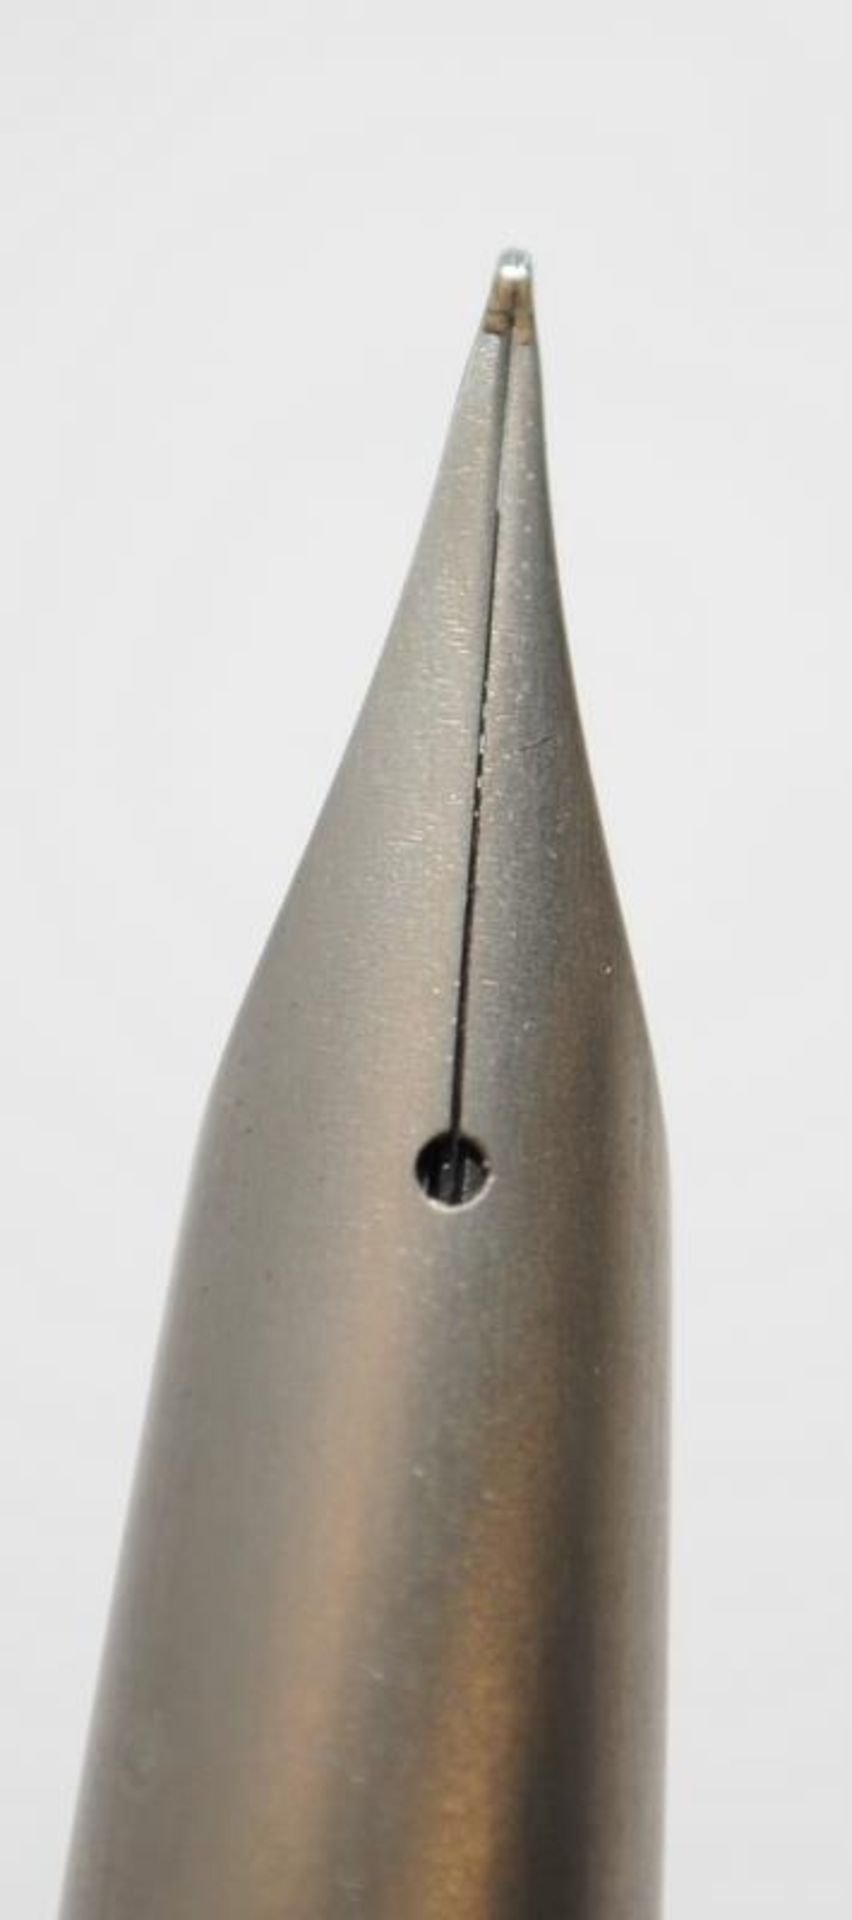 Rare Parker T1 titanium, made to celebrate the first moon landings. Near mint condition. Ref. 183 - Image 7 of 7